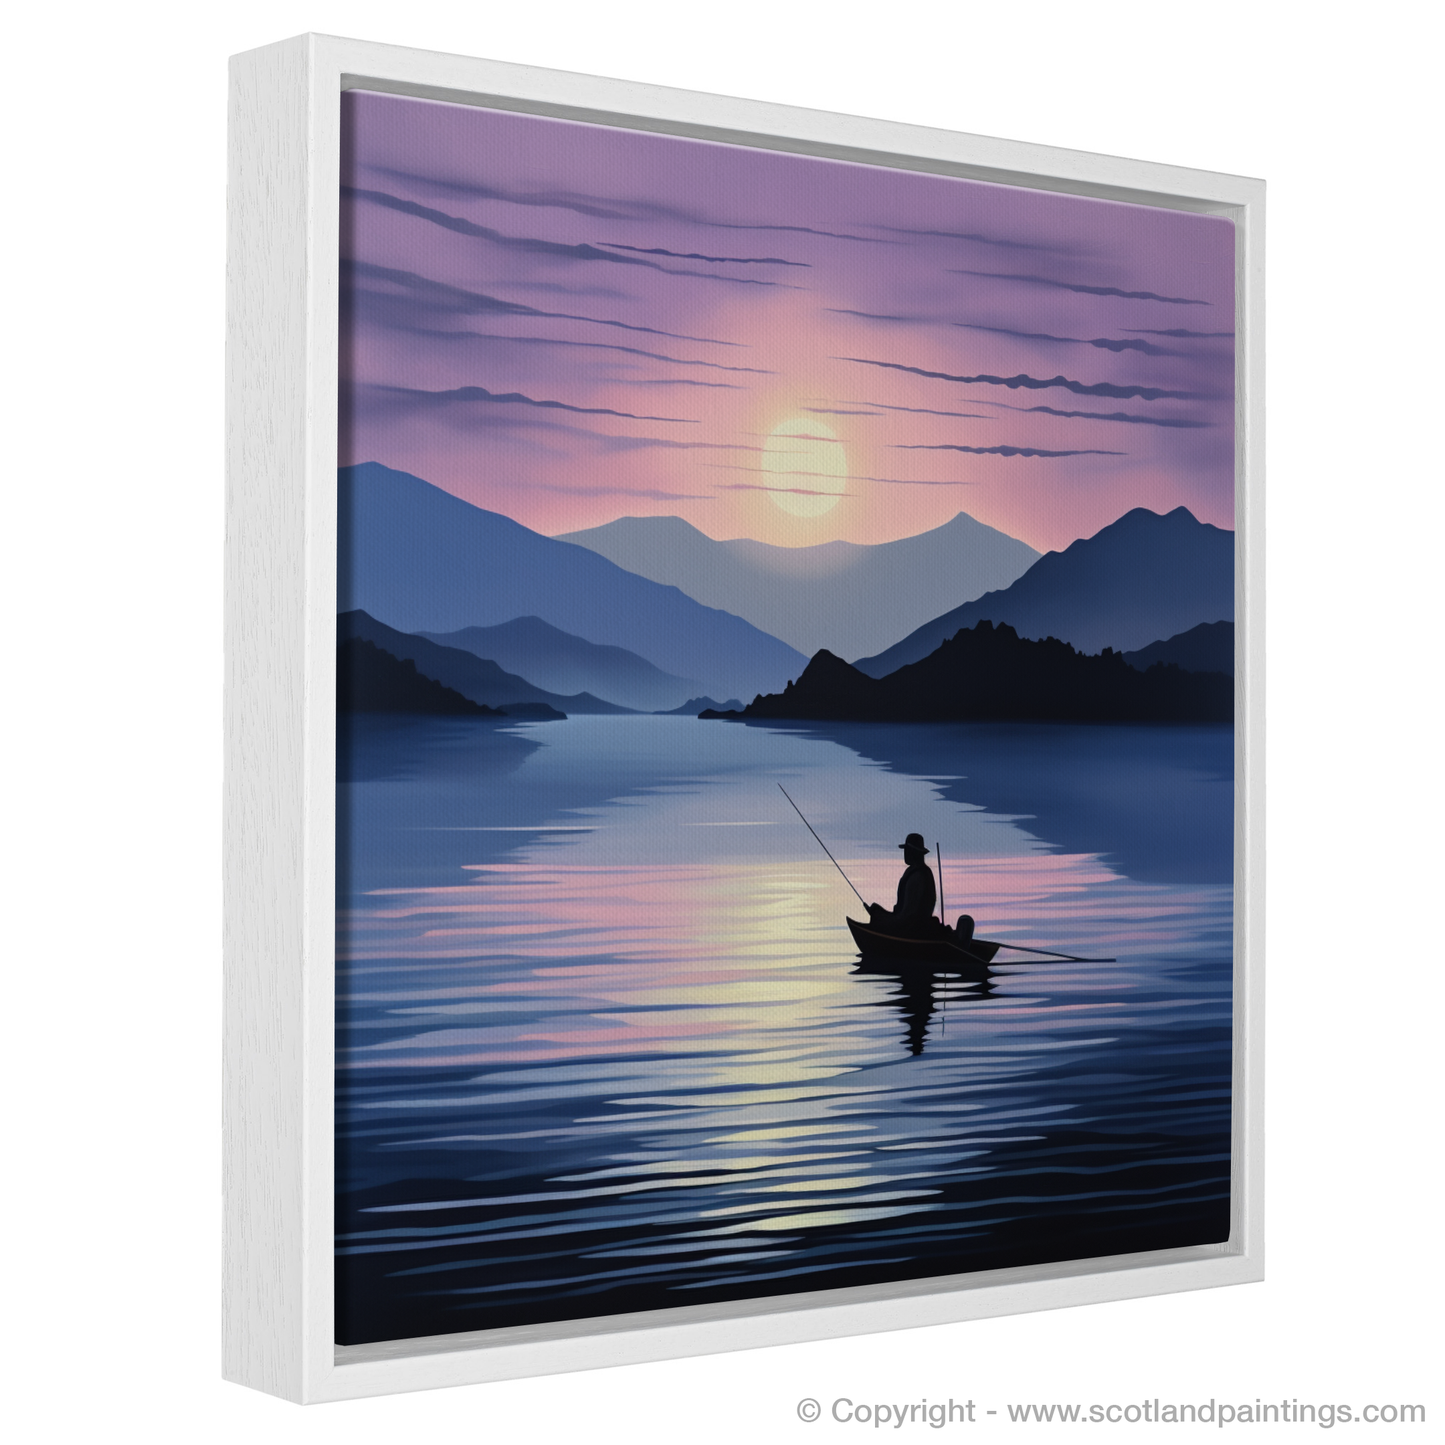 Painting and Art Print of Silhouetted fisherman on Loch Lomond entitled "Silhouetted Fisherman at Dusk on Loch Lomond".